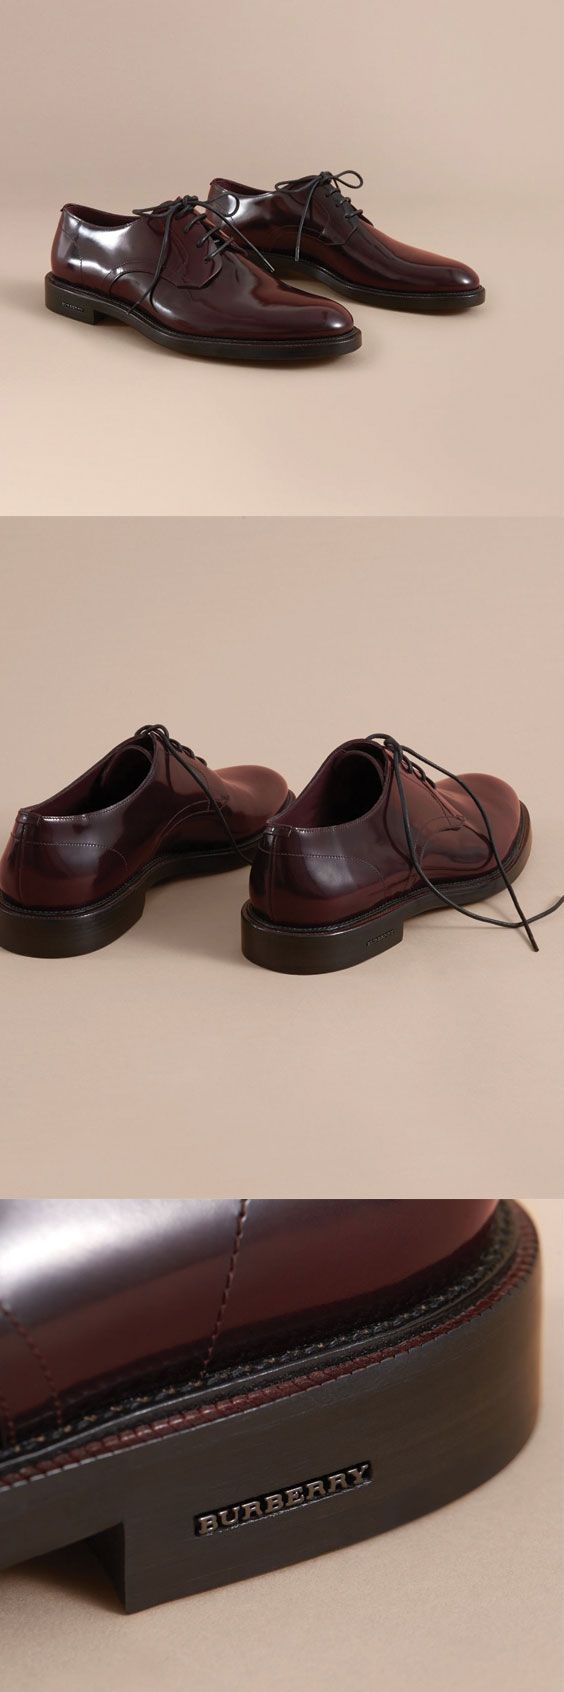 Burberry Polished Leather Derby Shoes $675...